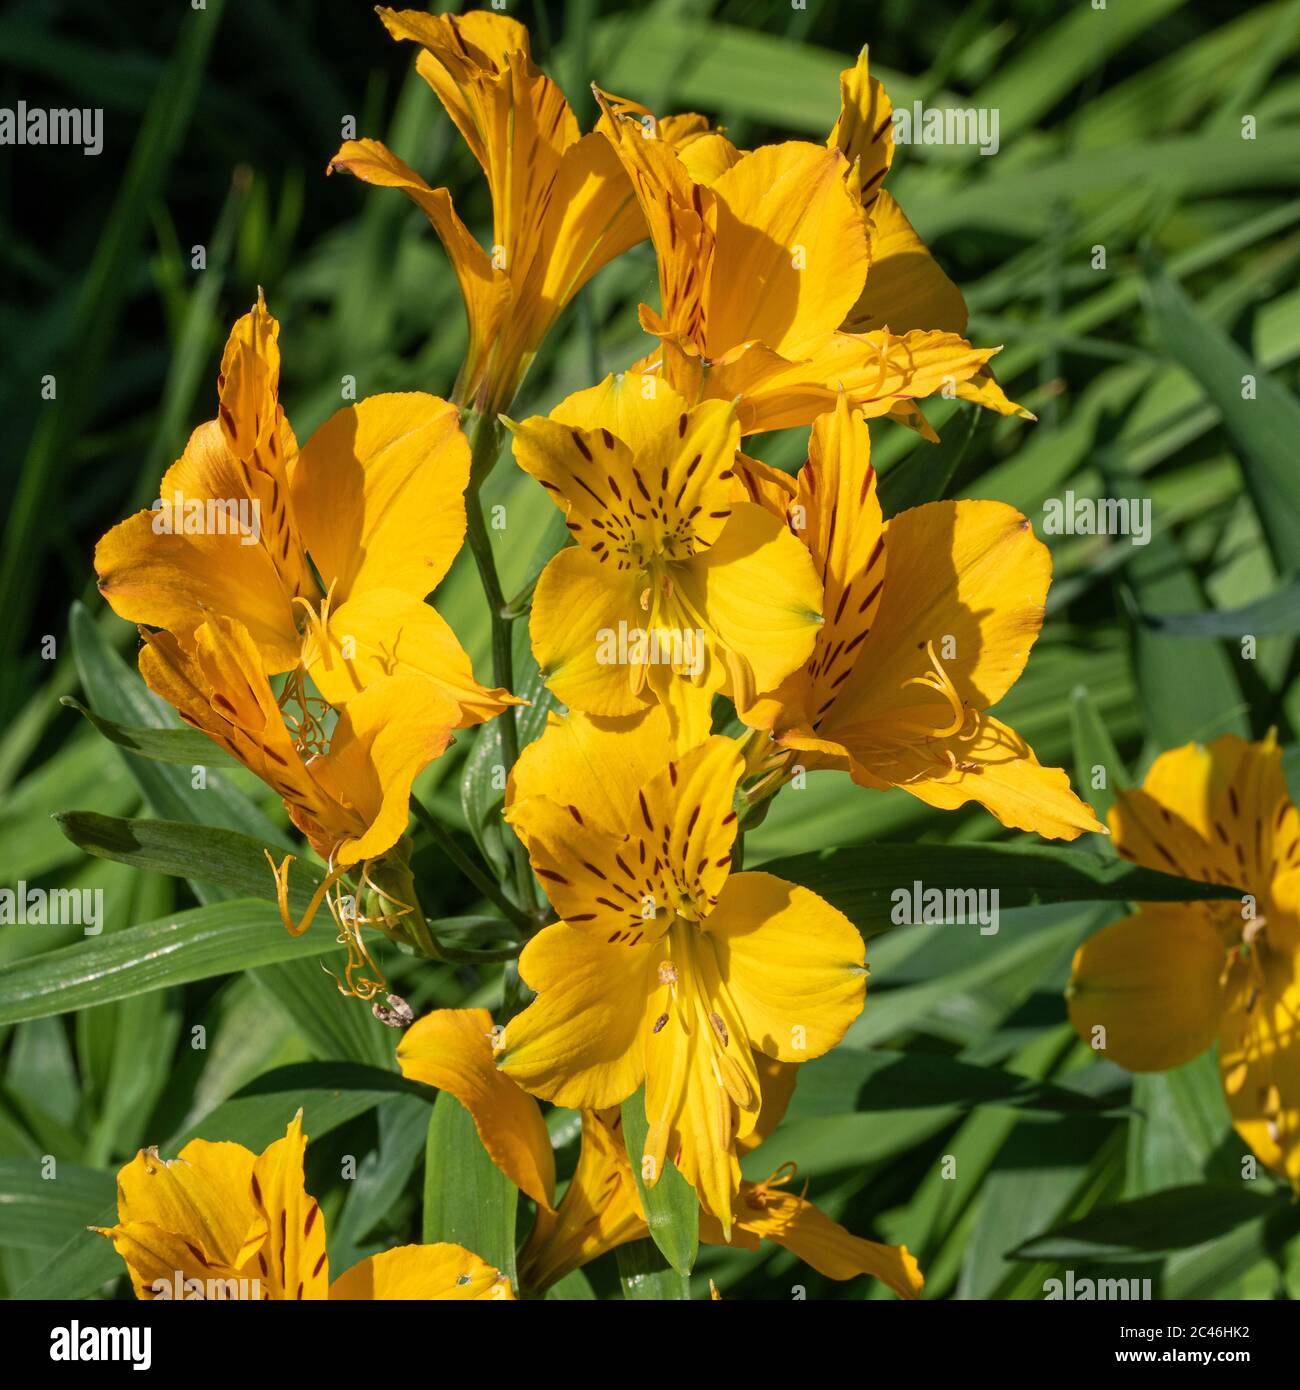 Bright Yellow and Maroon Speckled Alstroemeria Flowers in Full Bloom in a Garden in Alsager Cheshire England United Kingdom UK Stock Photo